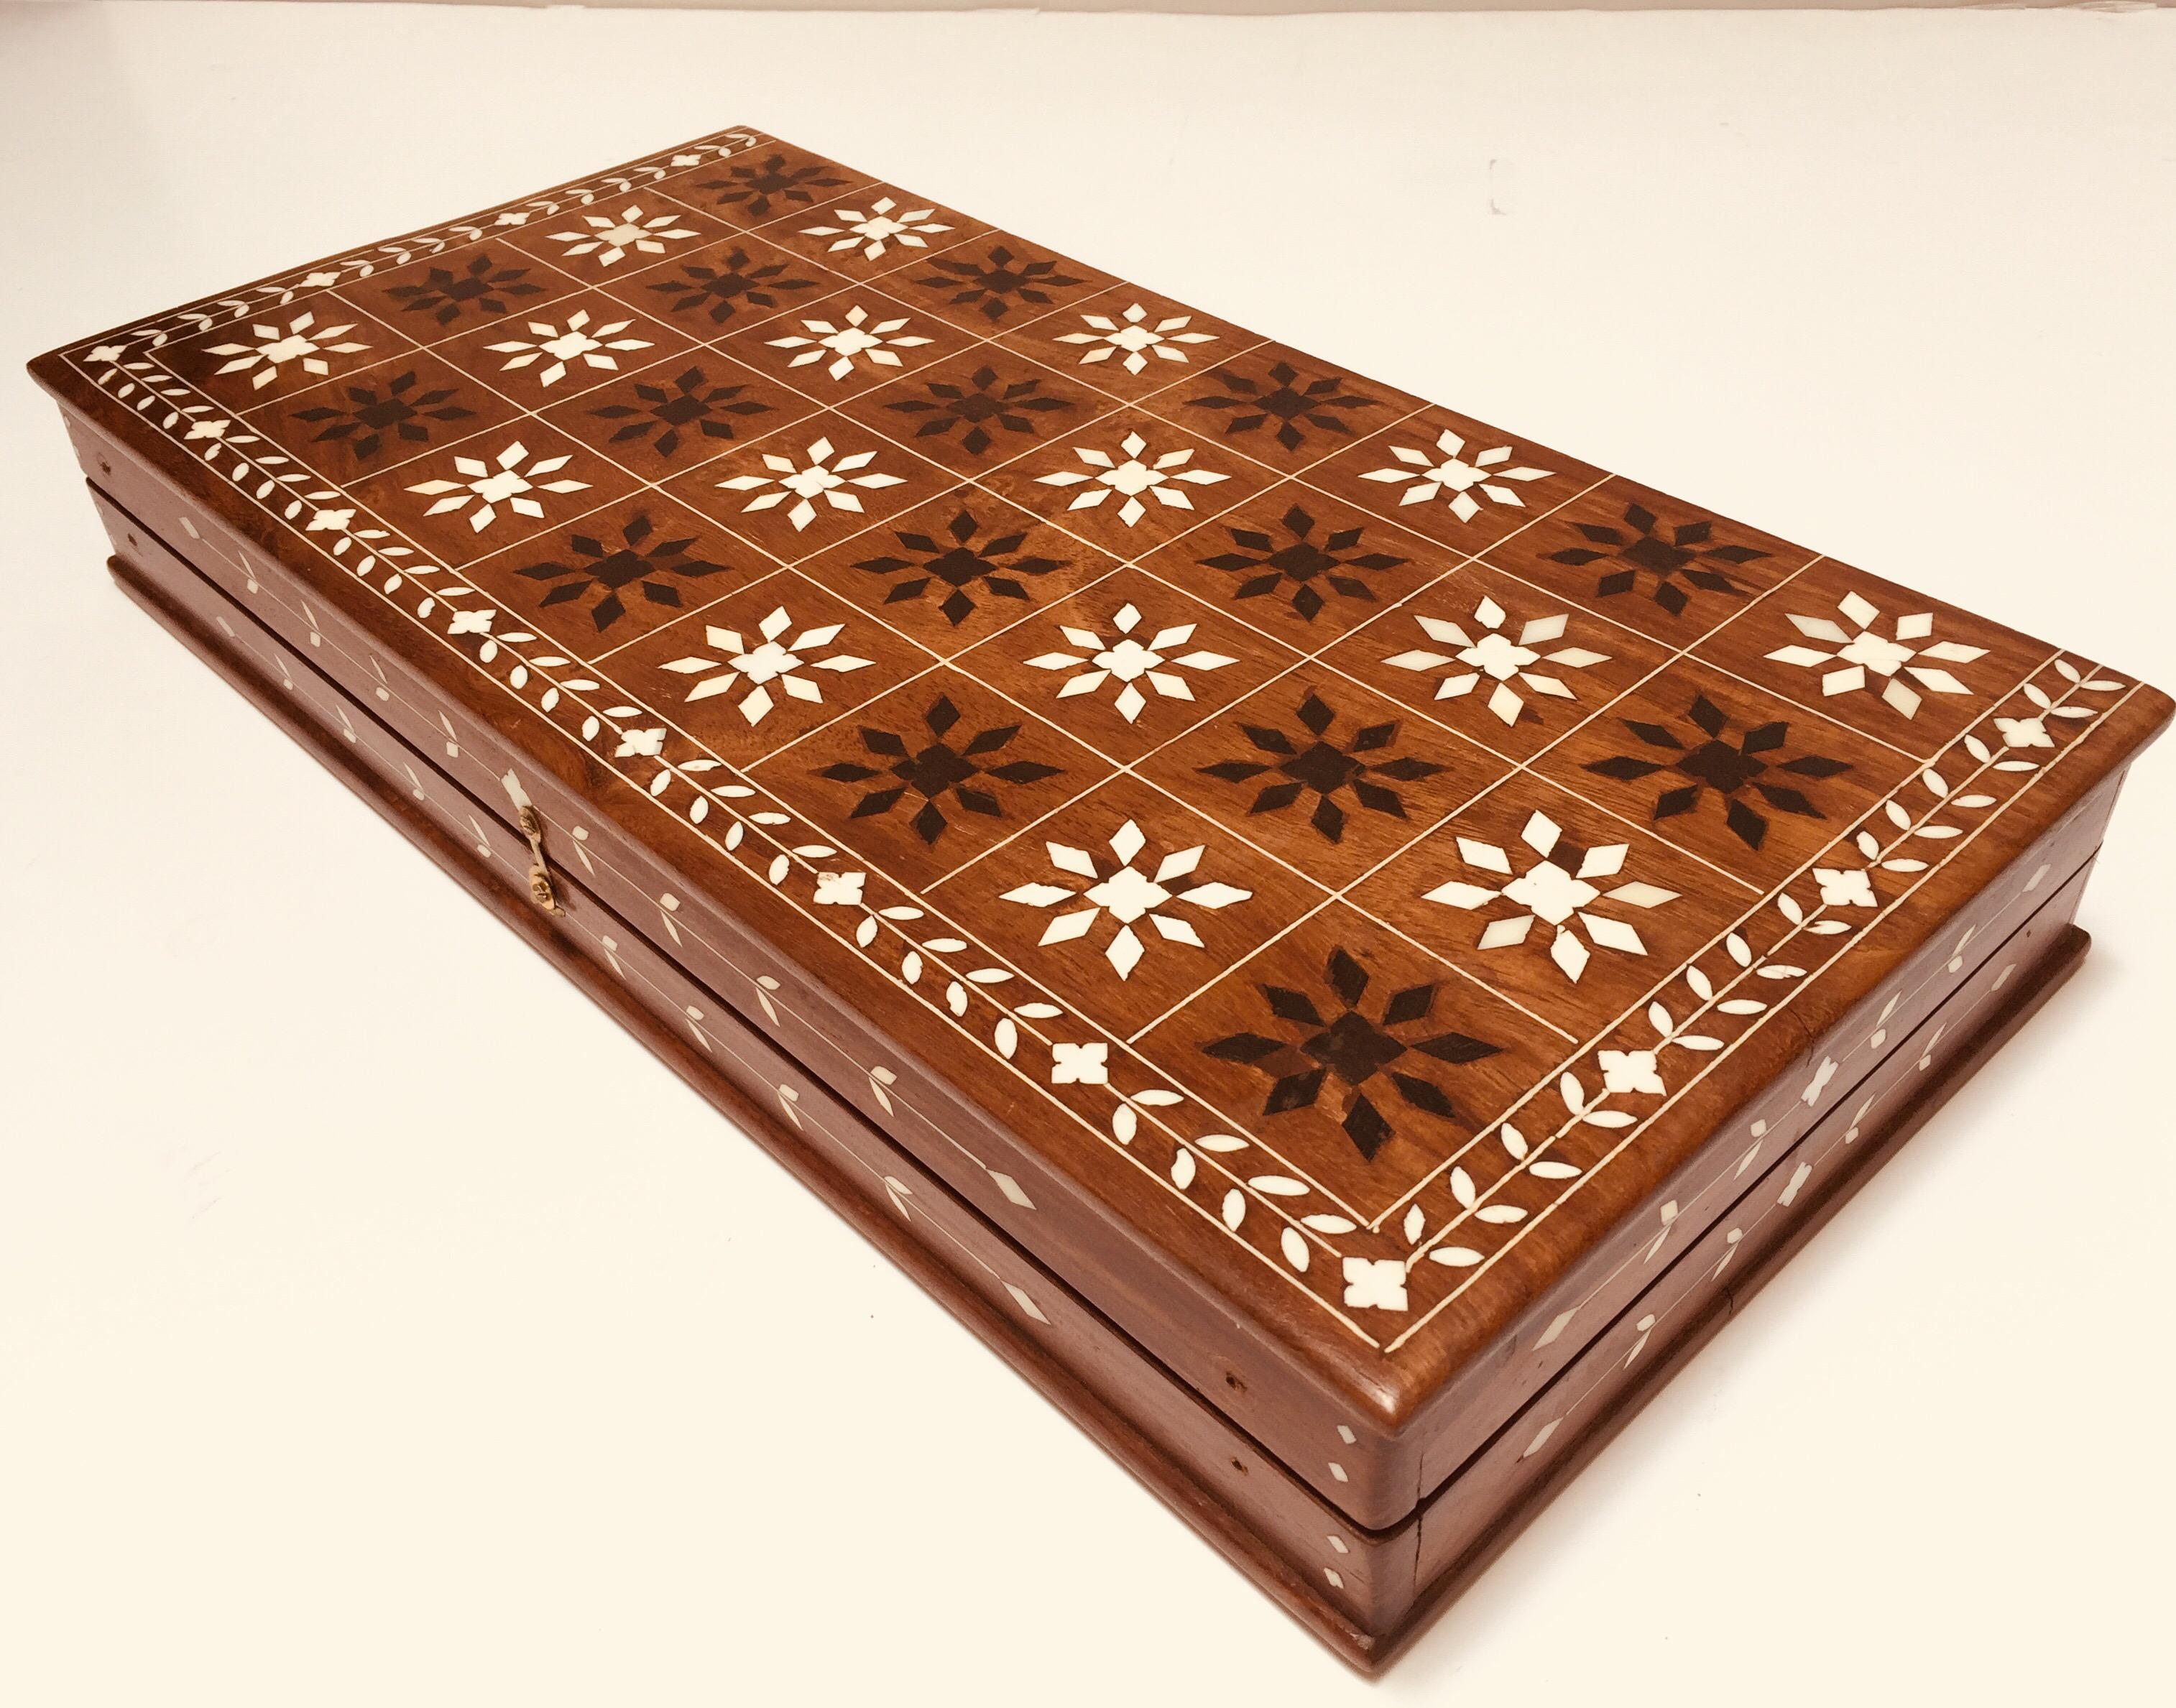 Large Vizagapatam checkers set with backelite pieces and inlay board.
Fine and elegant Anglo-Indian checkers or chess board with elaborate inlay.
The top is finely carved and inlaid with fine details designs in black and white.
Made in Vizagapatam,